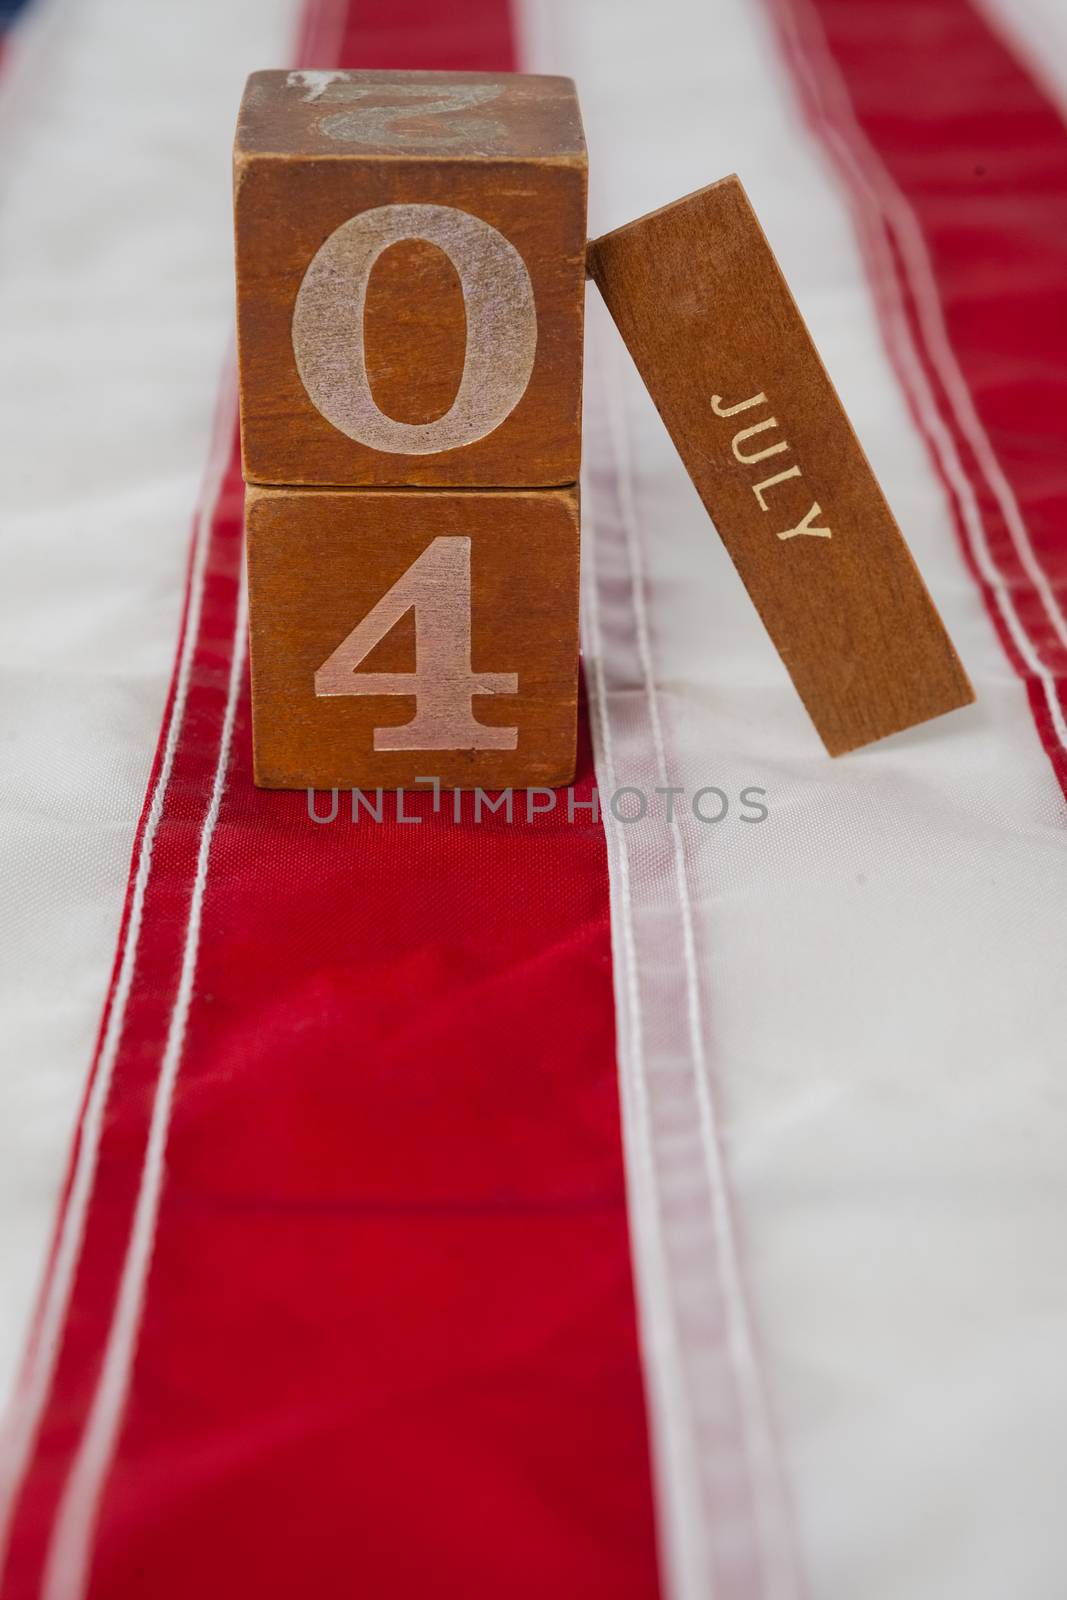 Dates blocks on American flag with 4th july theme by Wavebreakmedia